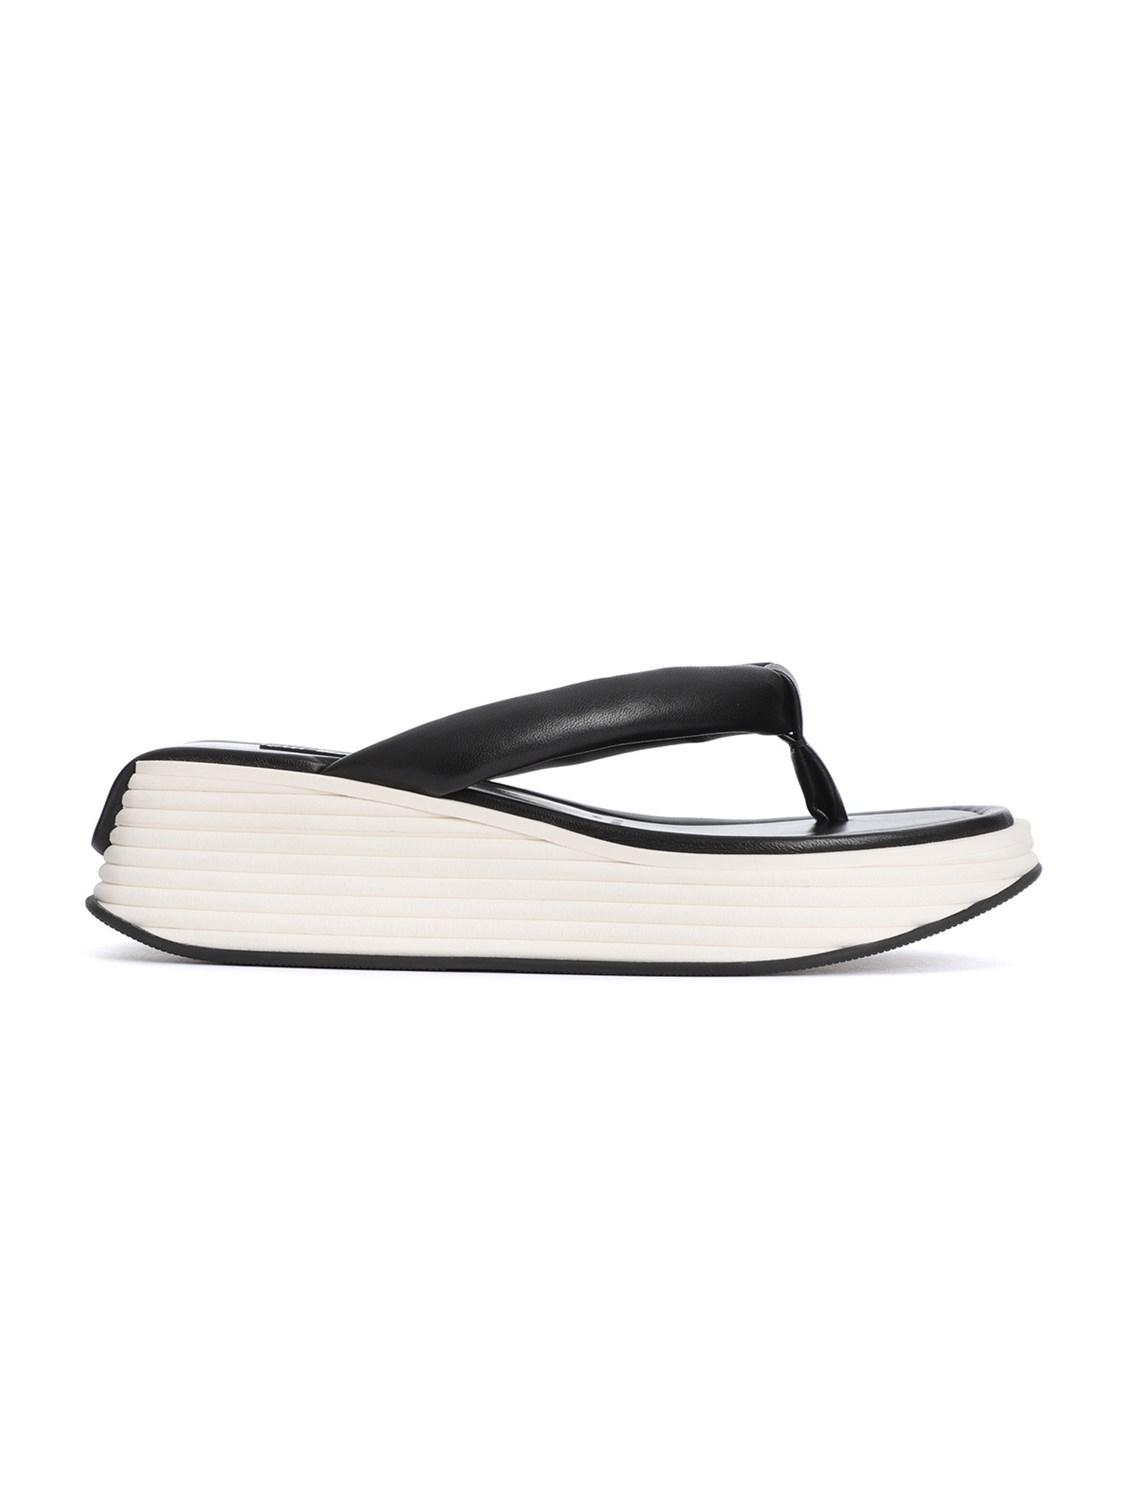 Givenchy Be3040e0n0004 Women's Black Leather Flip Flops - Lyst